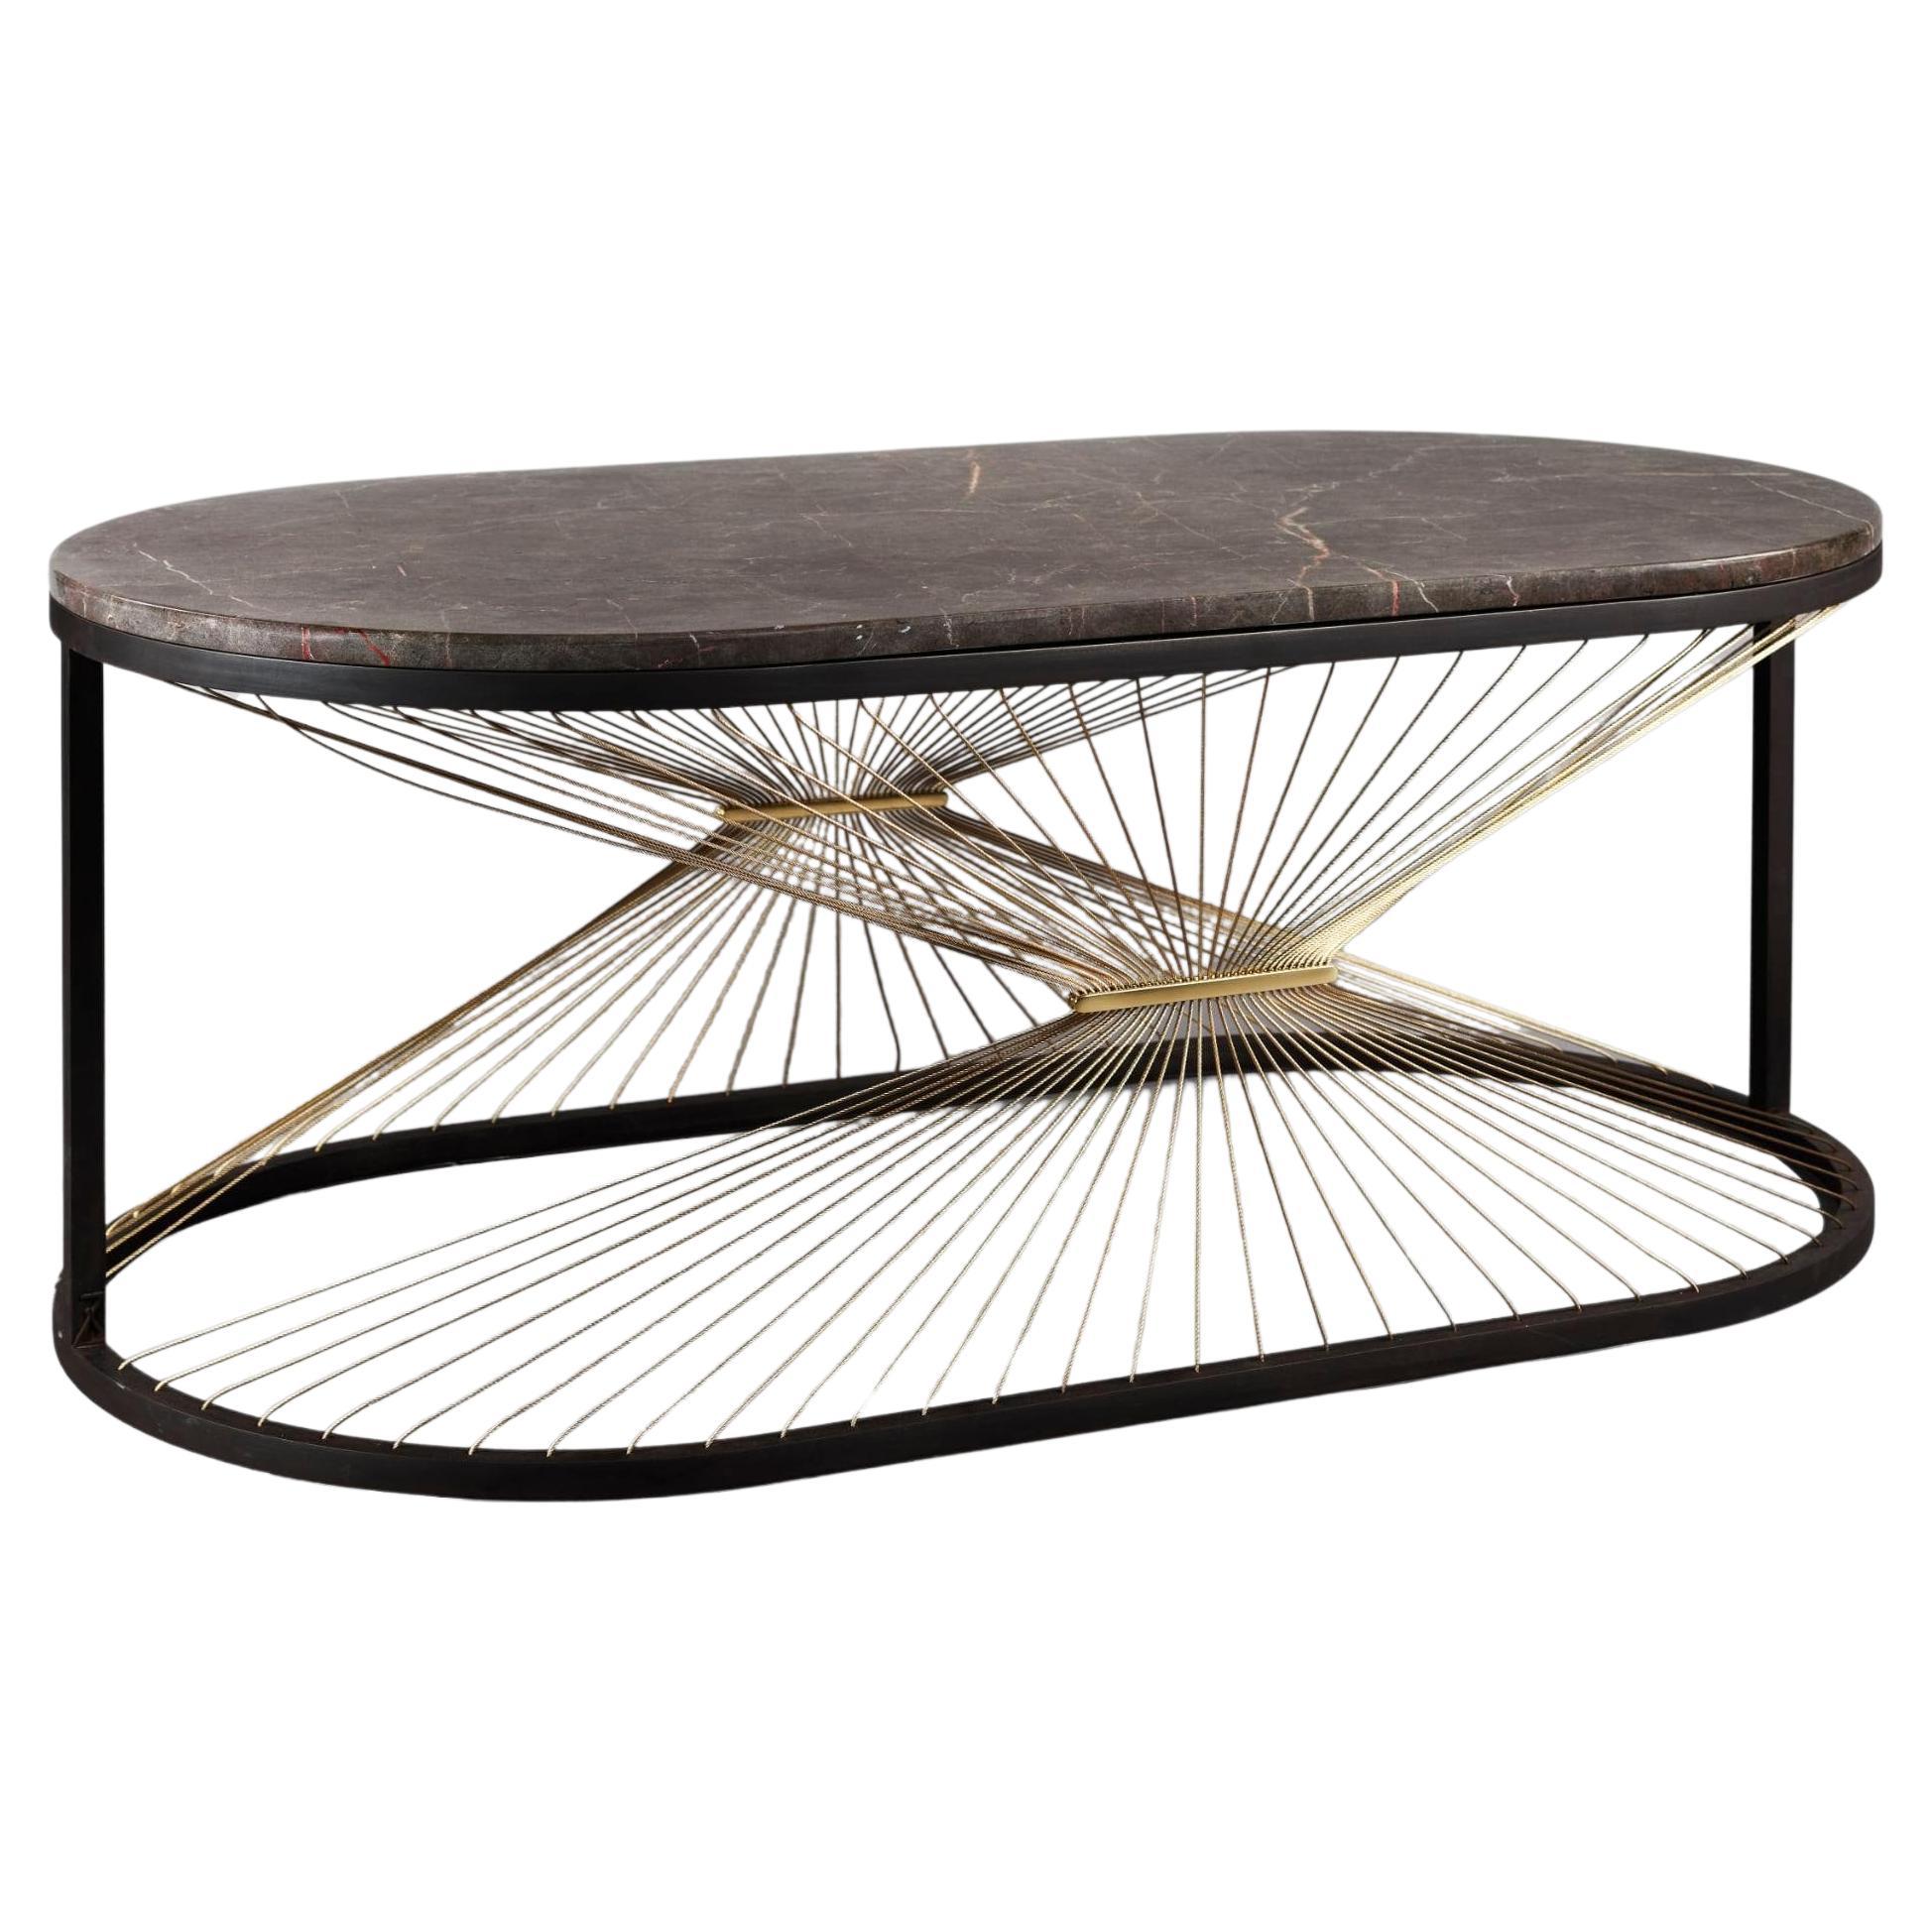 Centered at the heart of the entertaining space this coffee table strikes the perfect balance between practicality and aesthetic elegance. With a show stopping oval form the table feels like a work of art and is sure to draw attention with its